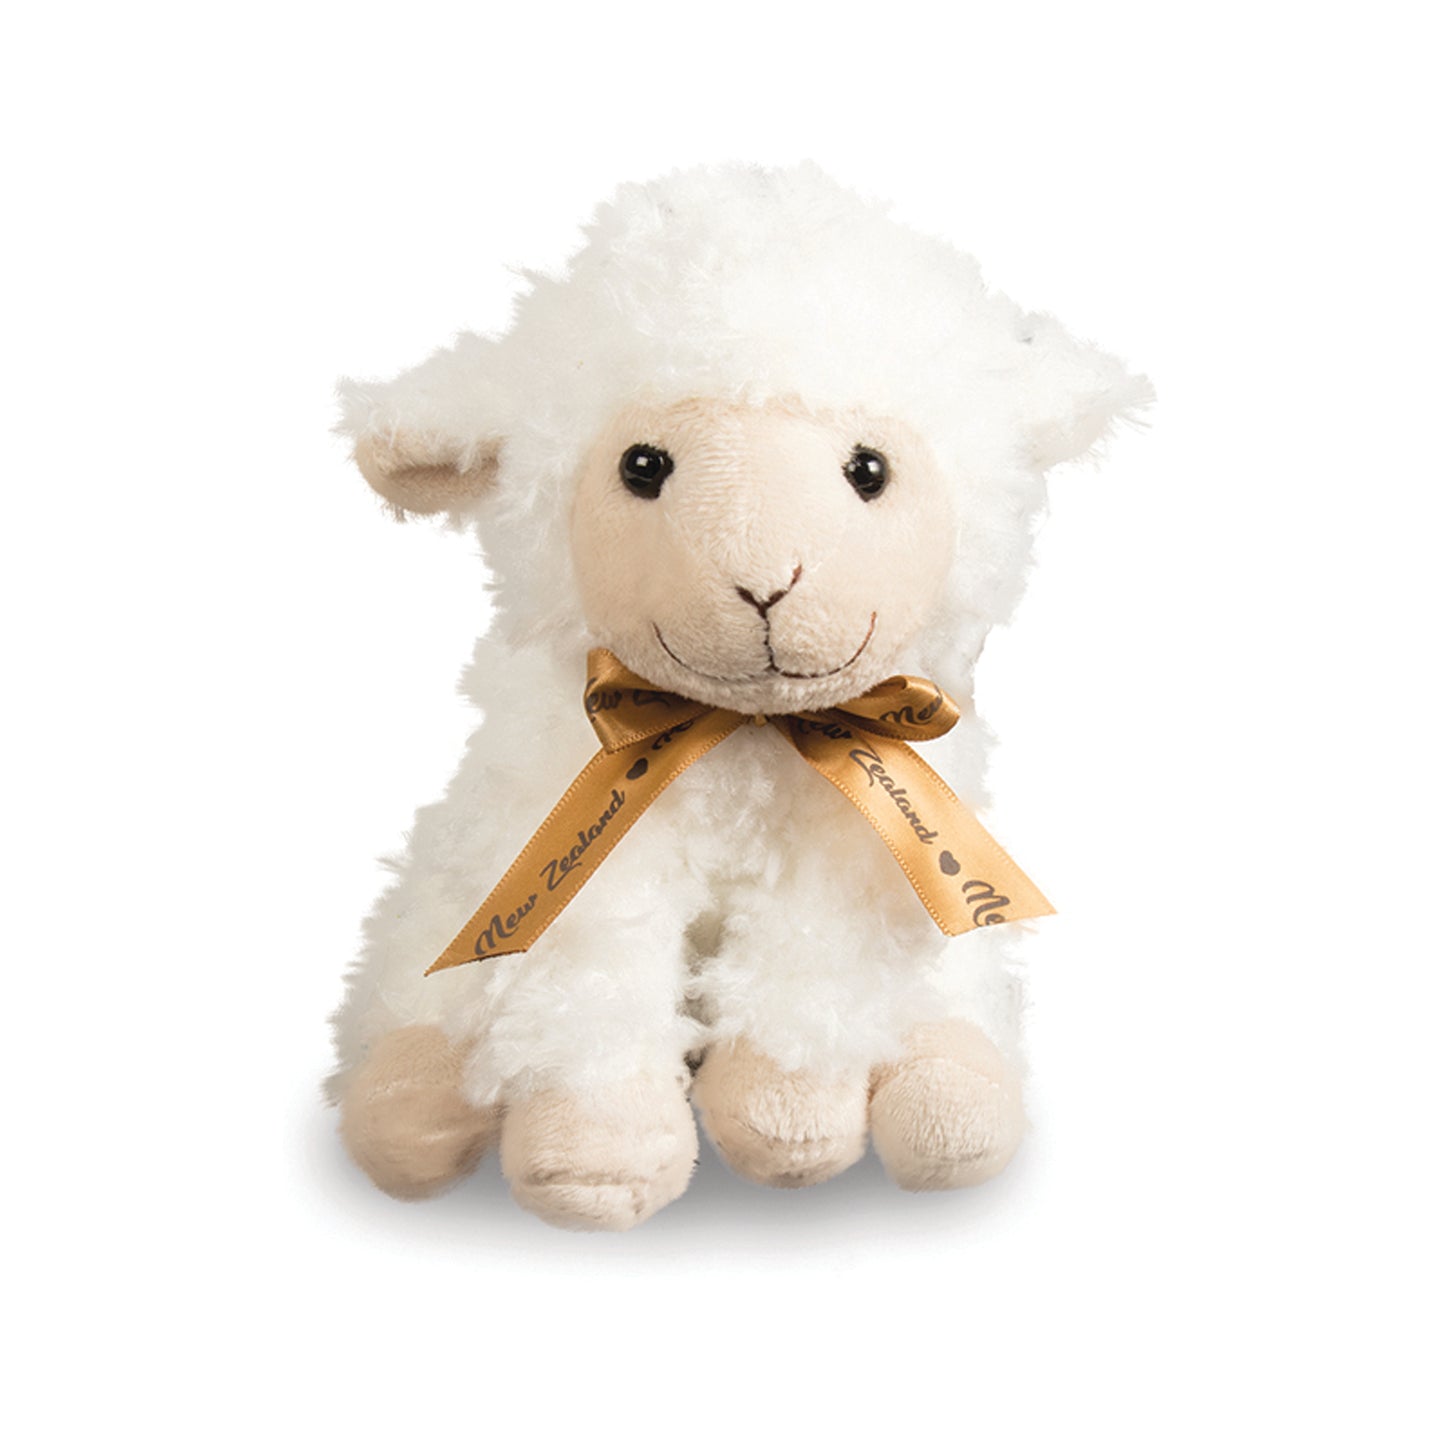 STTR - Sheep Toy Sitting with Tan Ribbon